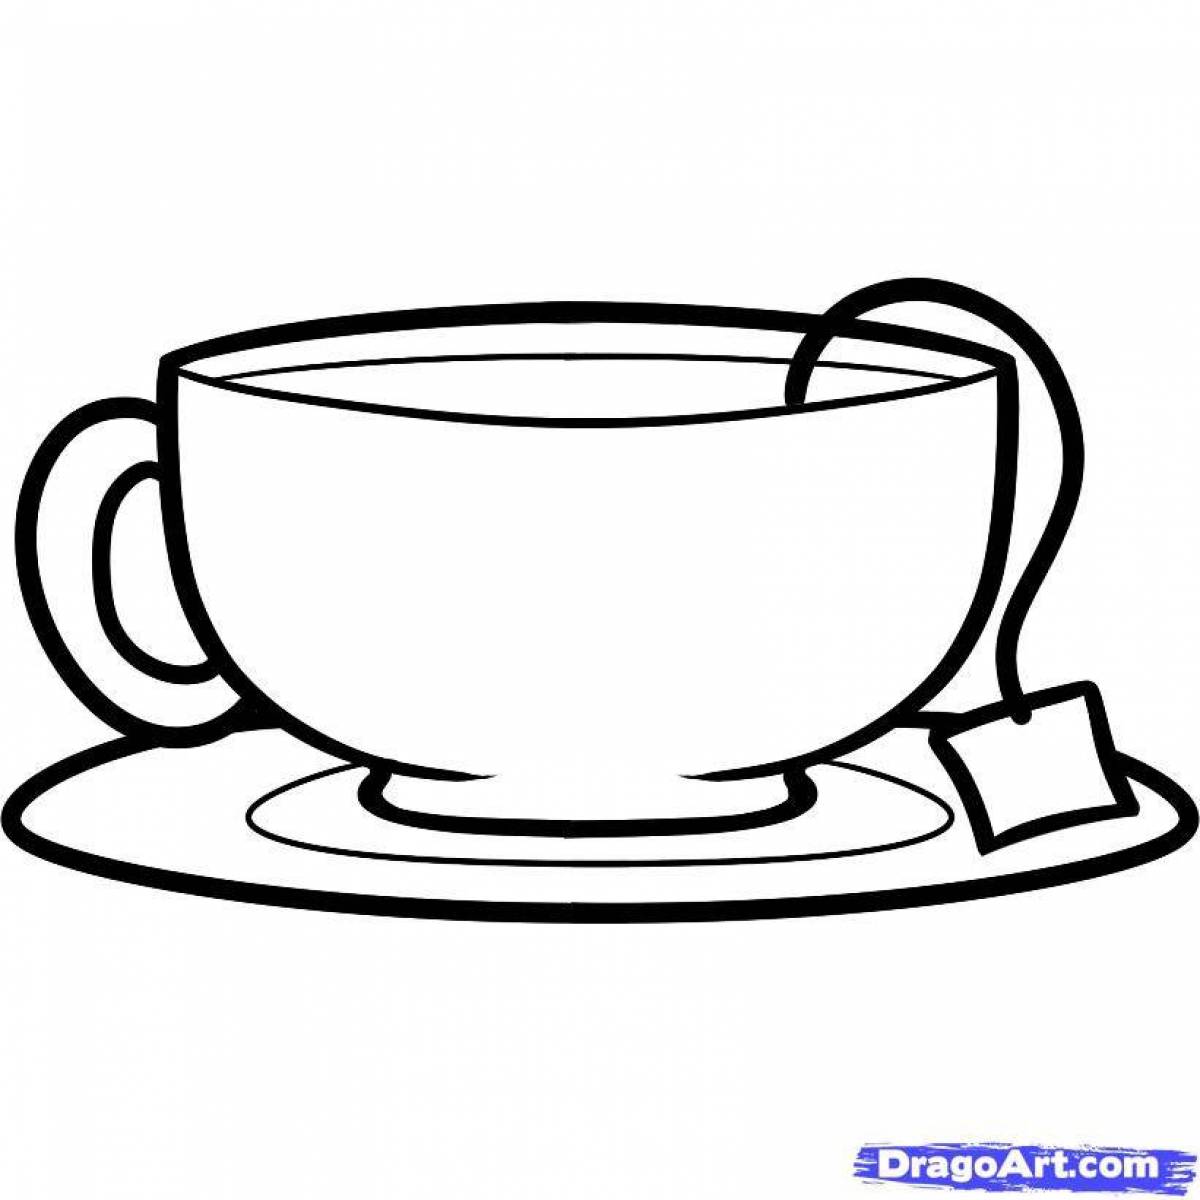 Coloring cup and saucer